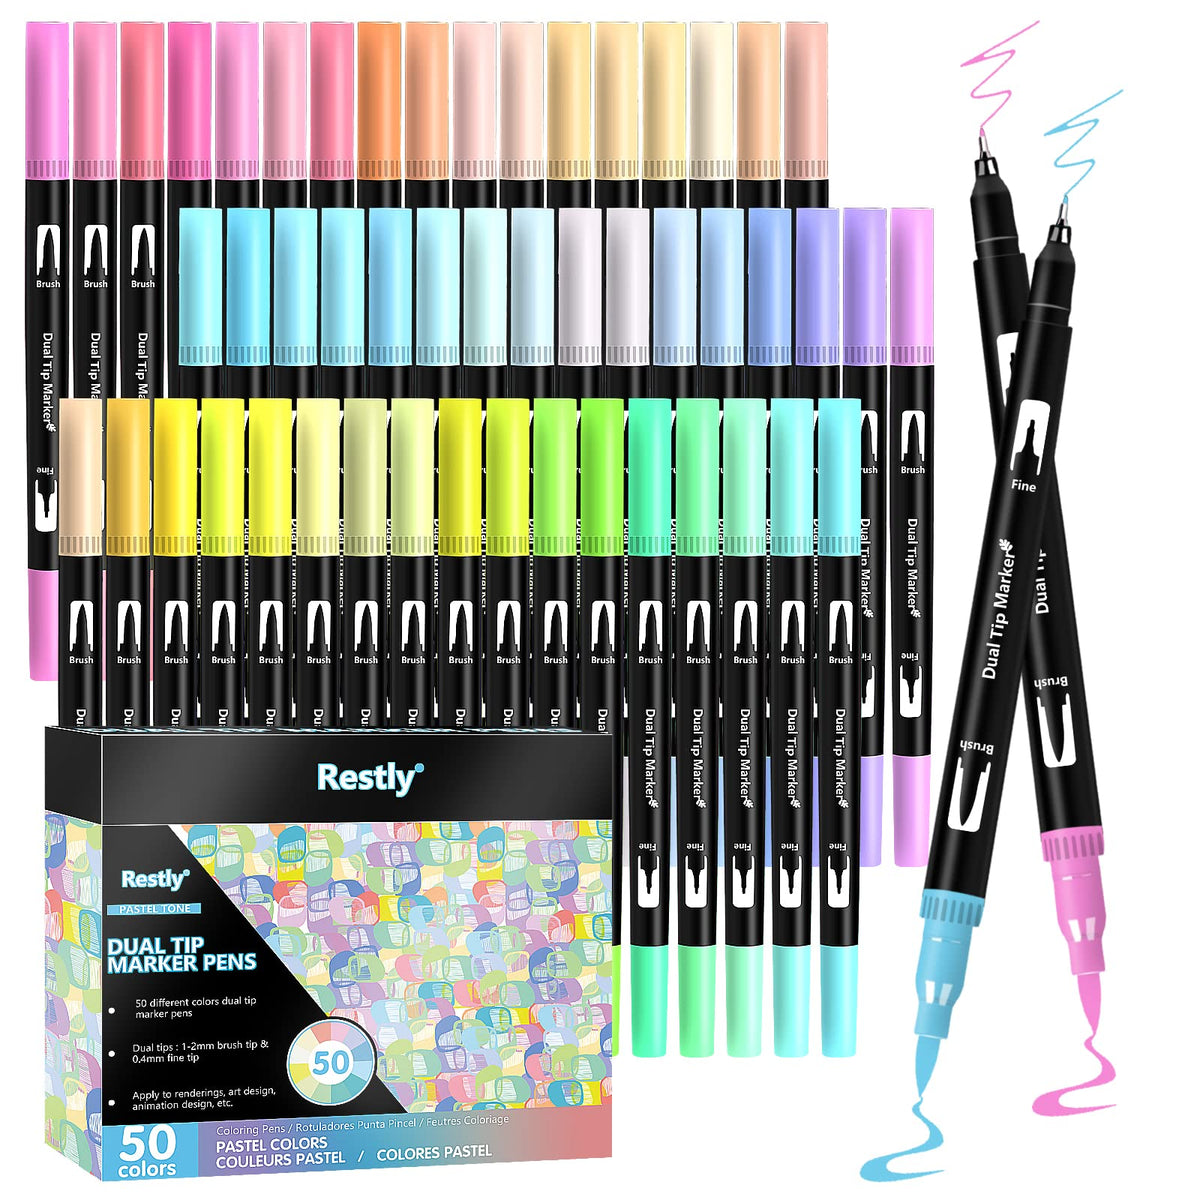 Eglyenlky Colored Markers for Adult Coloring Books, Dual Tip Brush Pens  with 100 Watercolor Brush pen (1-2mm) and Fine Tip Marker (0.4mm) for Kids